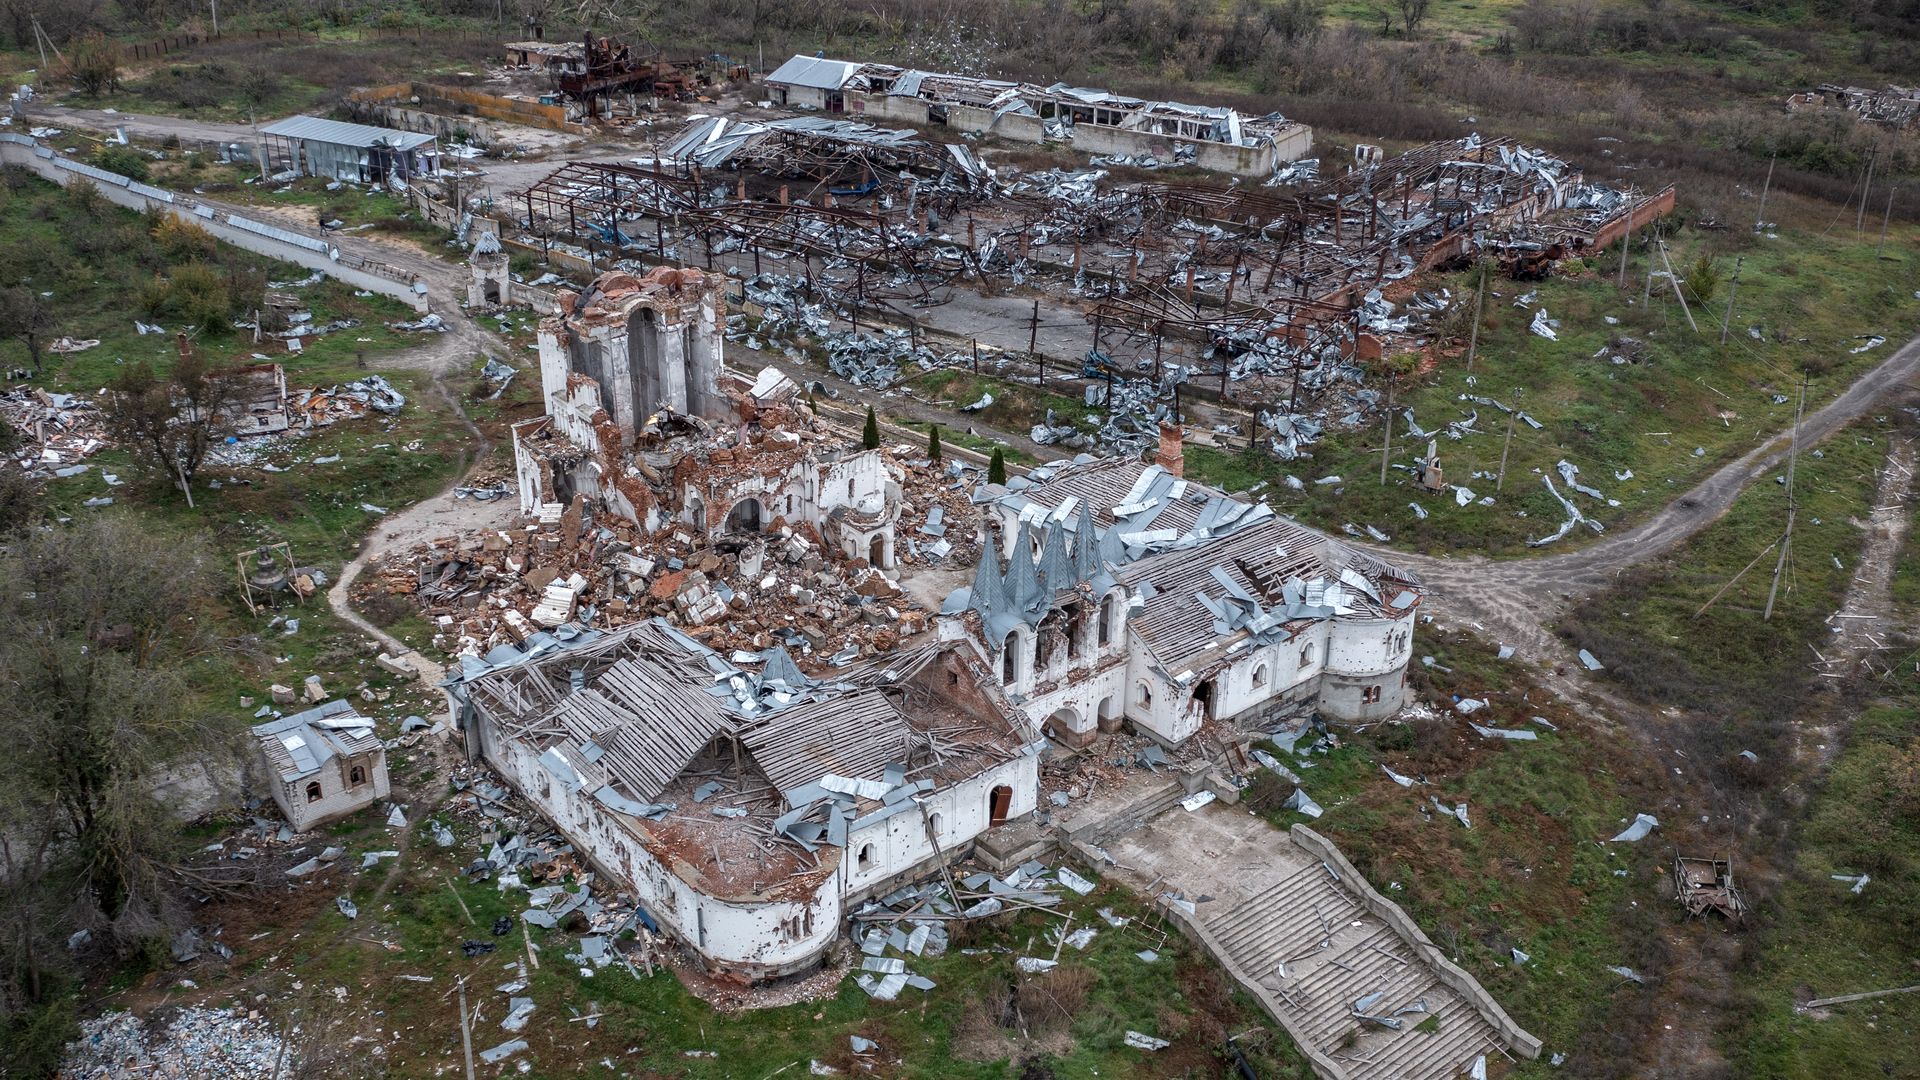  A monastery and warehouse lie destroyed during fighting between Ukrainian and Russian forces, on October 23, 2022 in Slovyansk, Donetsk oblast, Ukraine. 